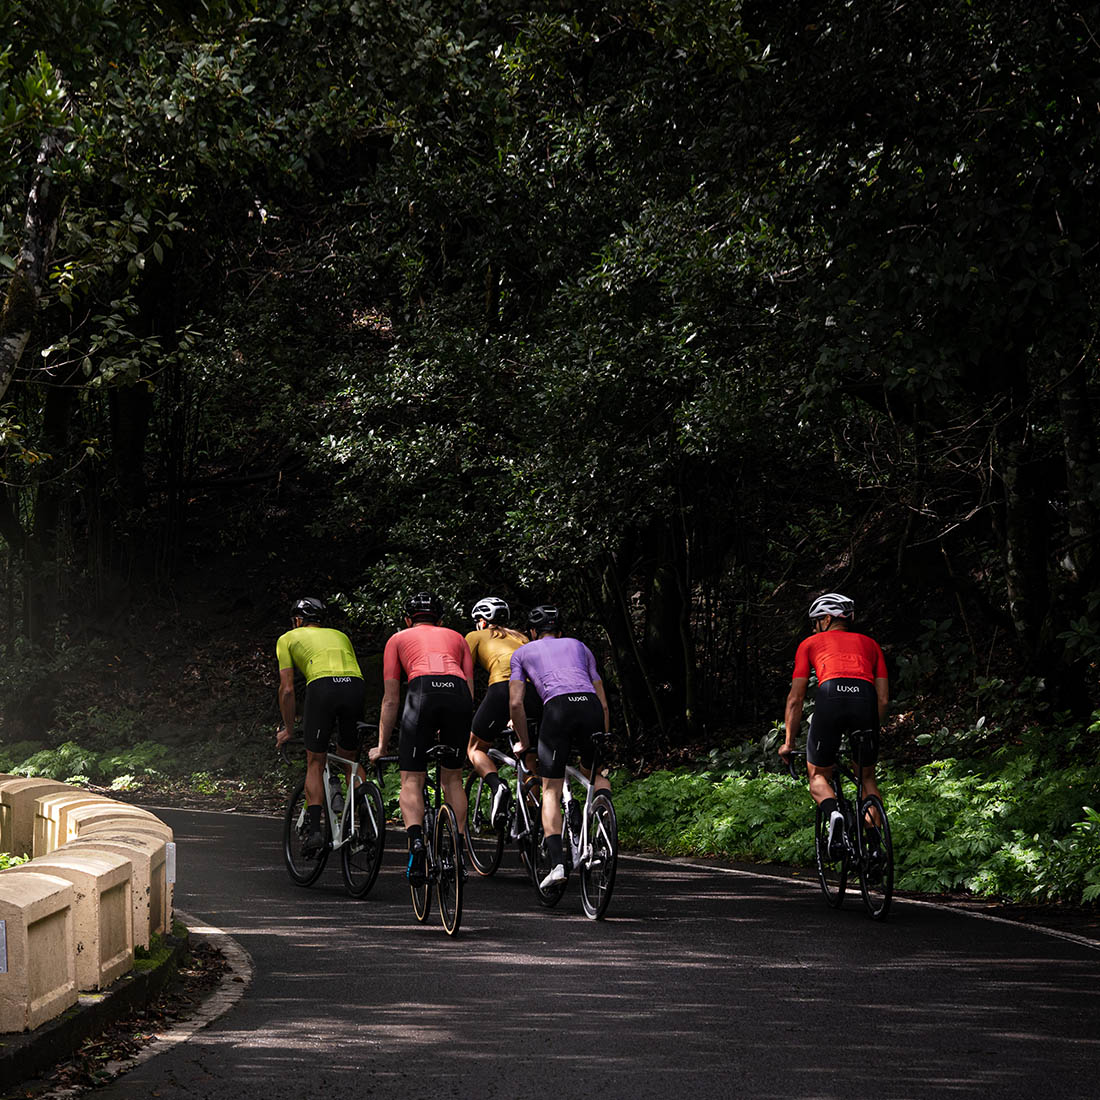 bunch of Luxa cyclists riding in awesome clean forest in Anaga